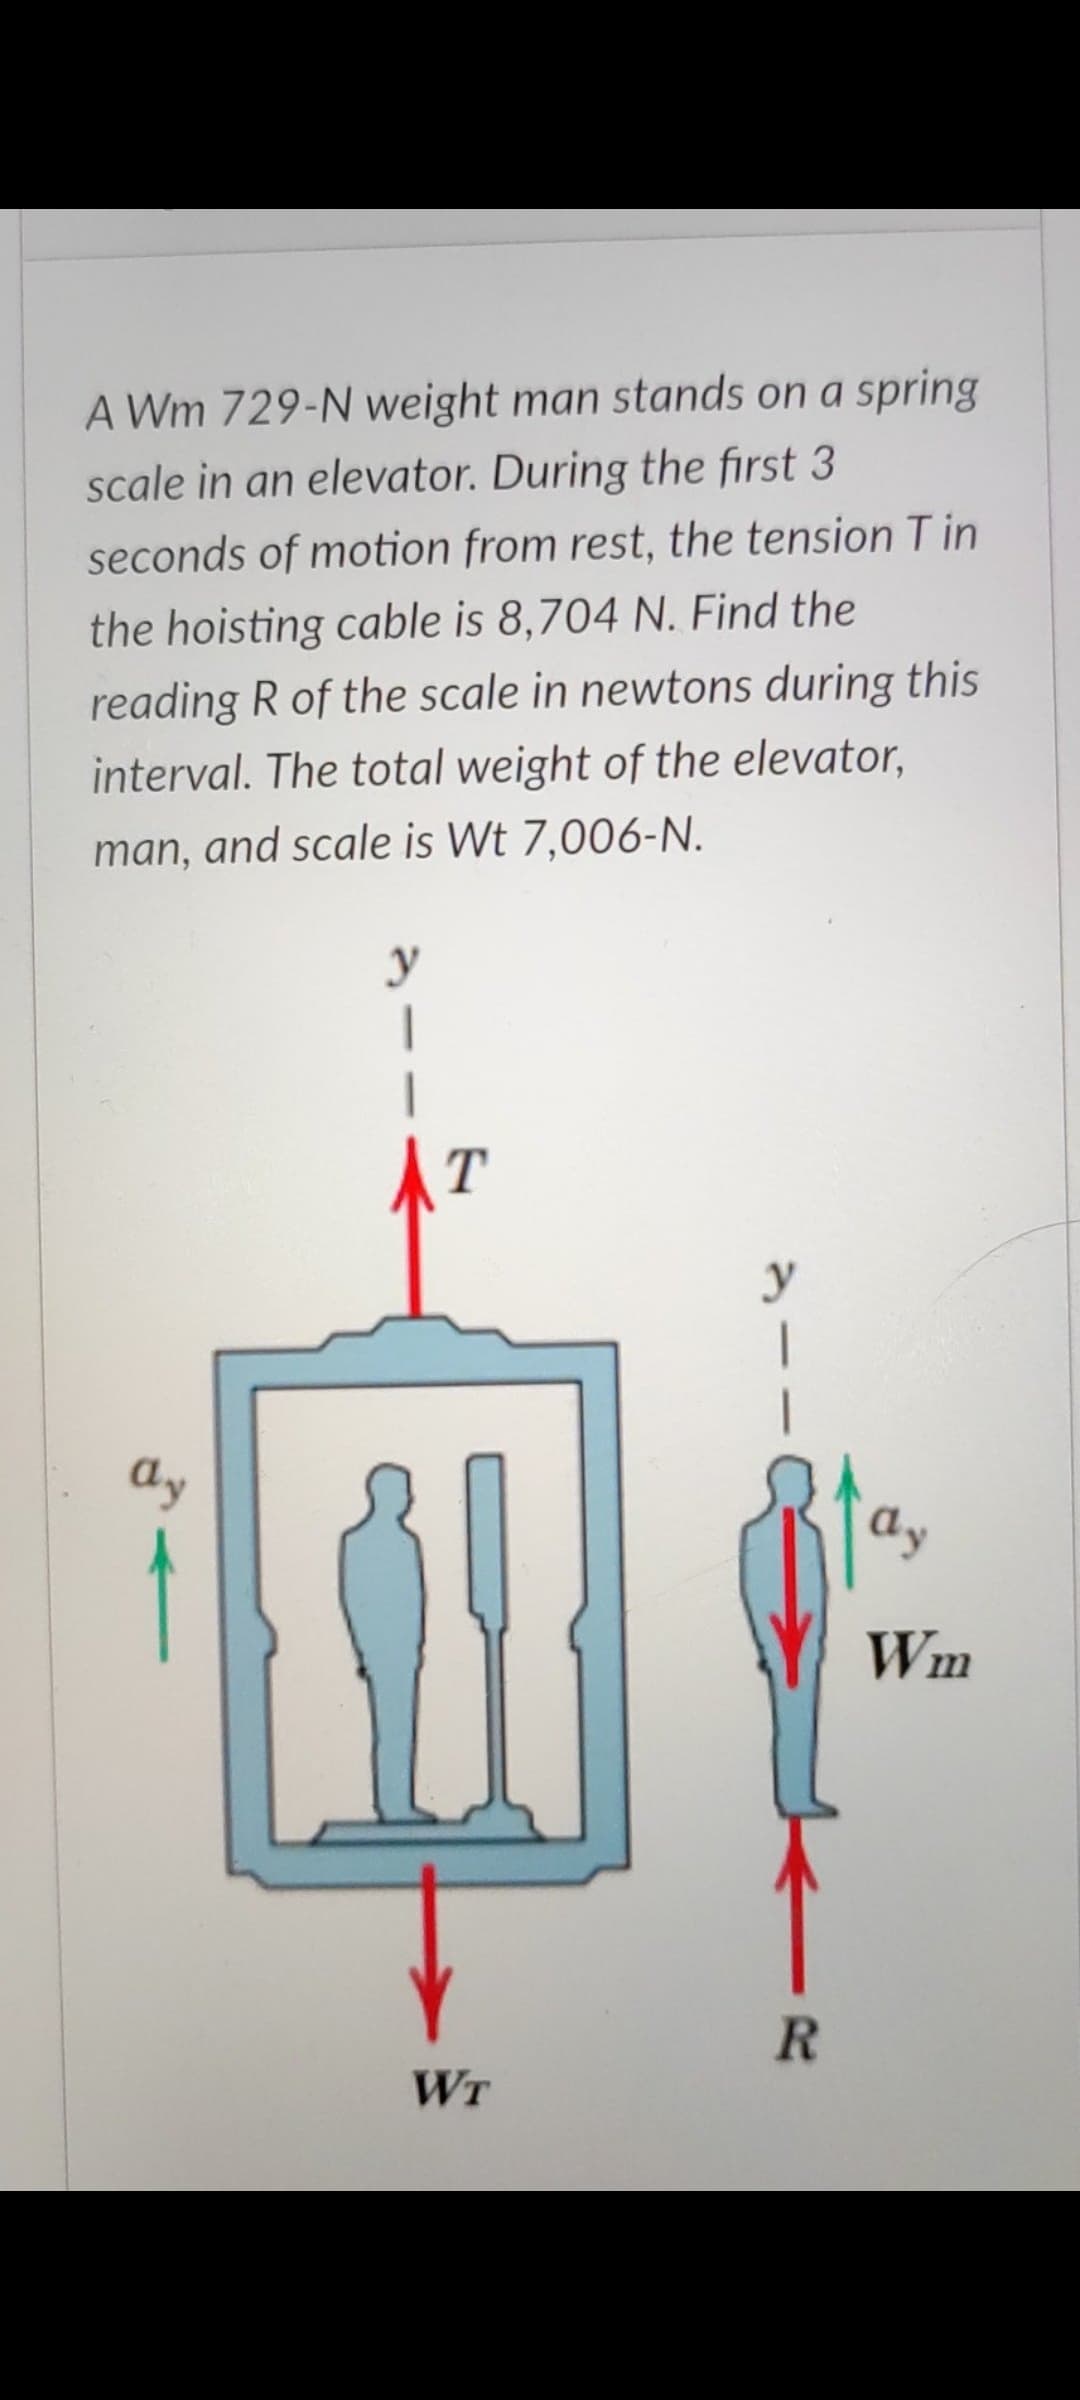 A Wm 729-N weight man stands on a spring
scale in an elevator. During the first 3
seconds of motion from rest, the tension Tin
the hoisting cable is 8,704 N. Find the
reading R of the scale in newtons during this
interval. The total weight of the elevator,
man, and scale is Wt 7,006-N.
y
1
y
T
WT
R
Wm